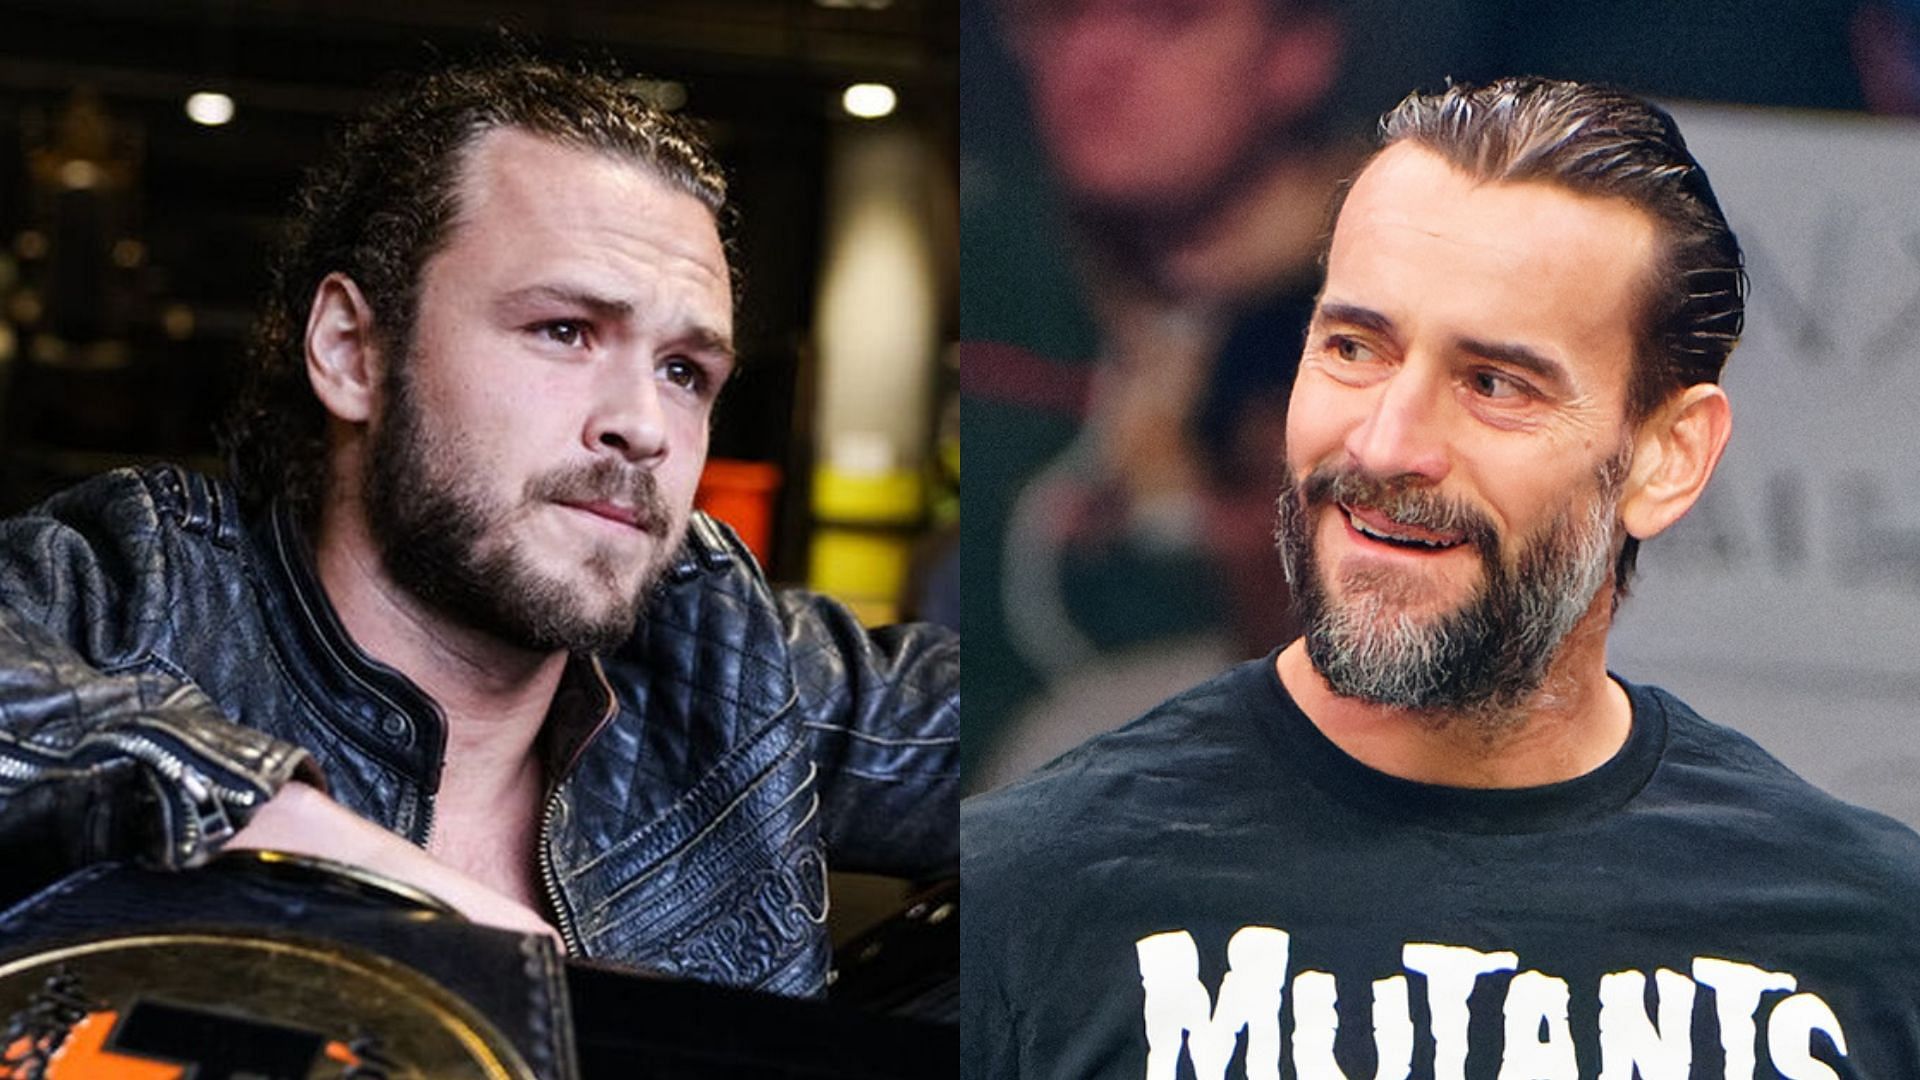 What did the announce team get told after the CM Punk/Jack Perry incident?